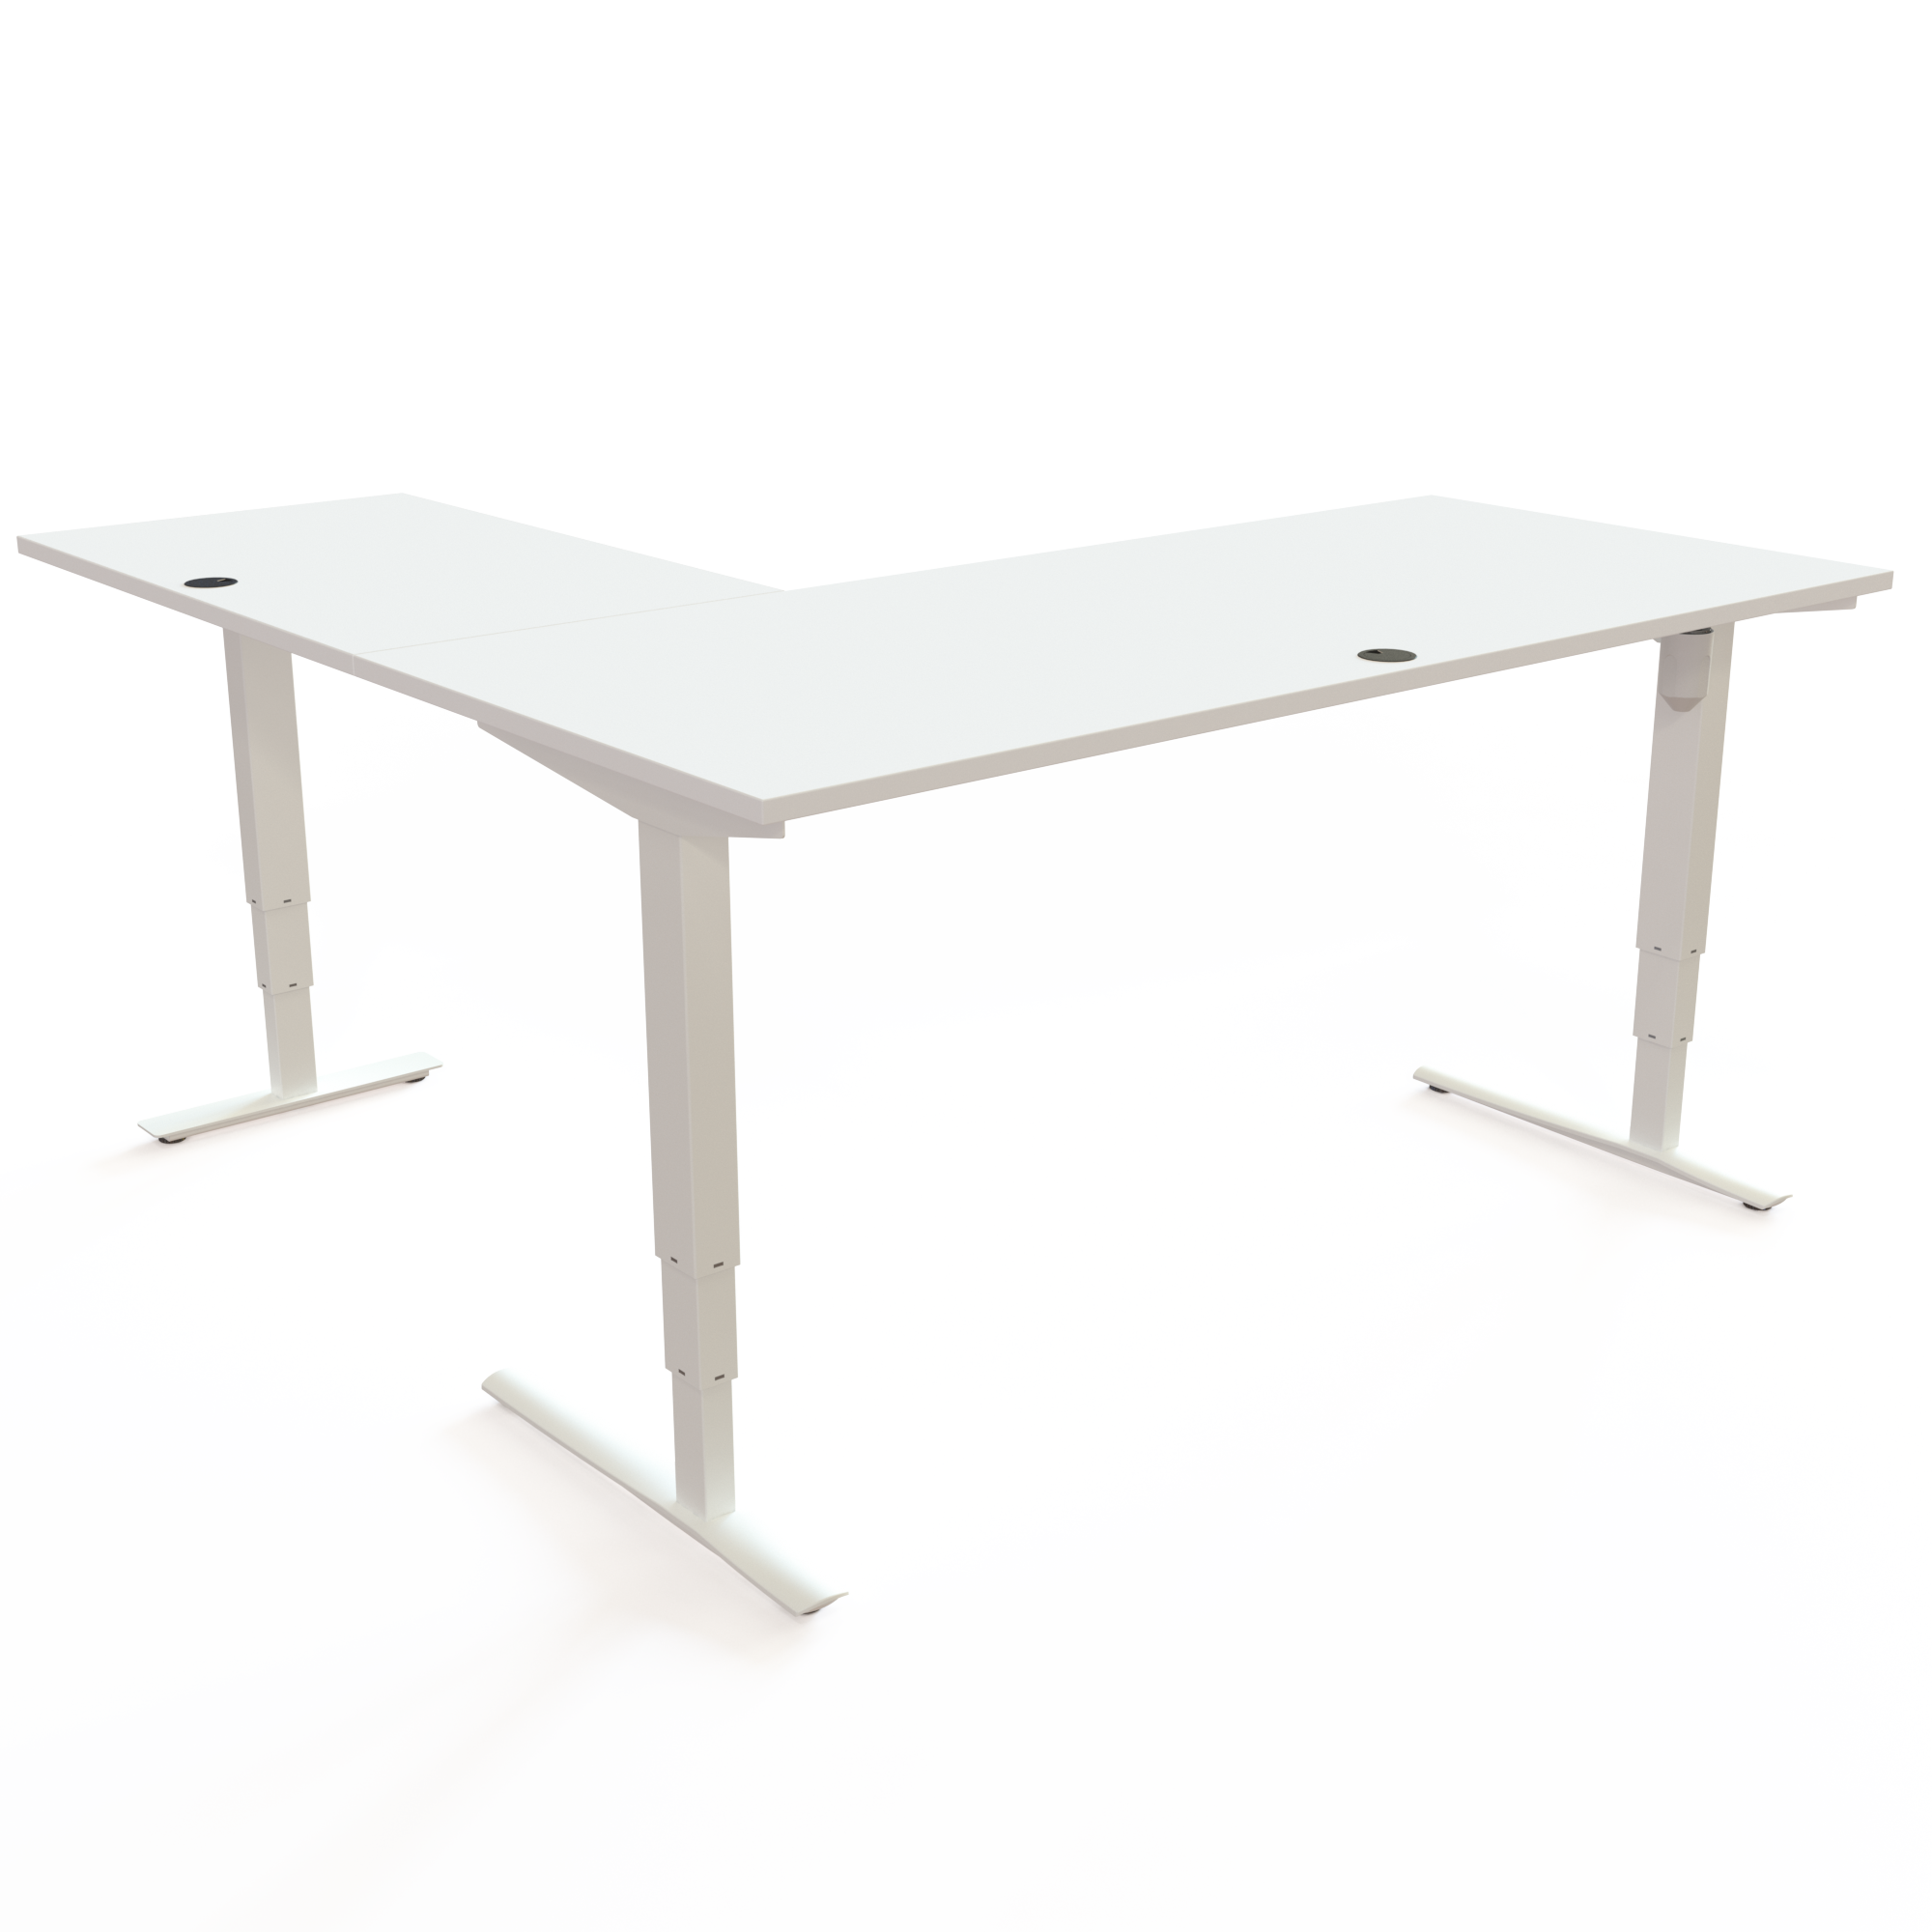 Electric Adjustable Desk | 180x180 cm | White with white frame